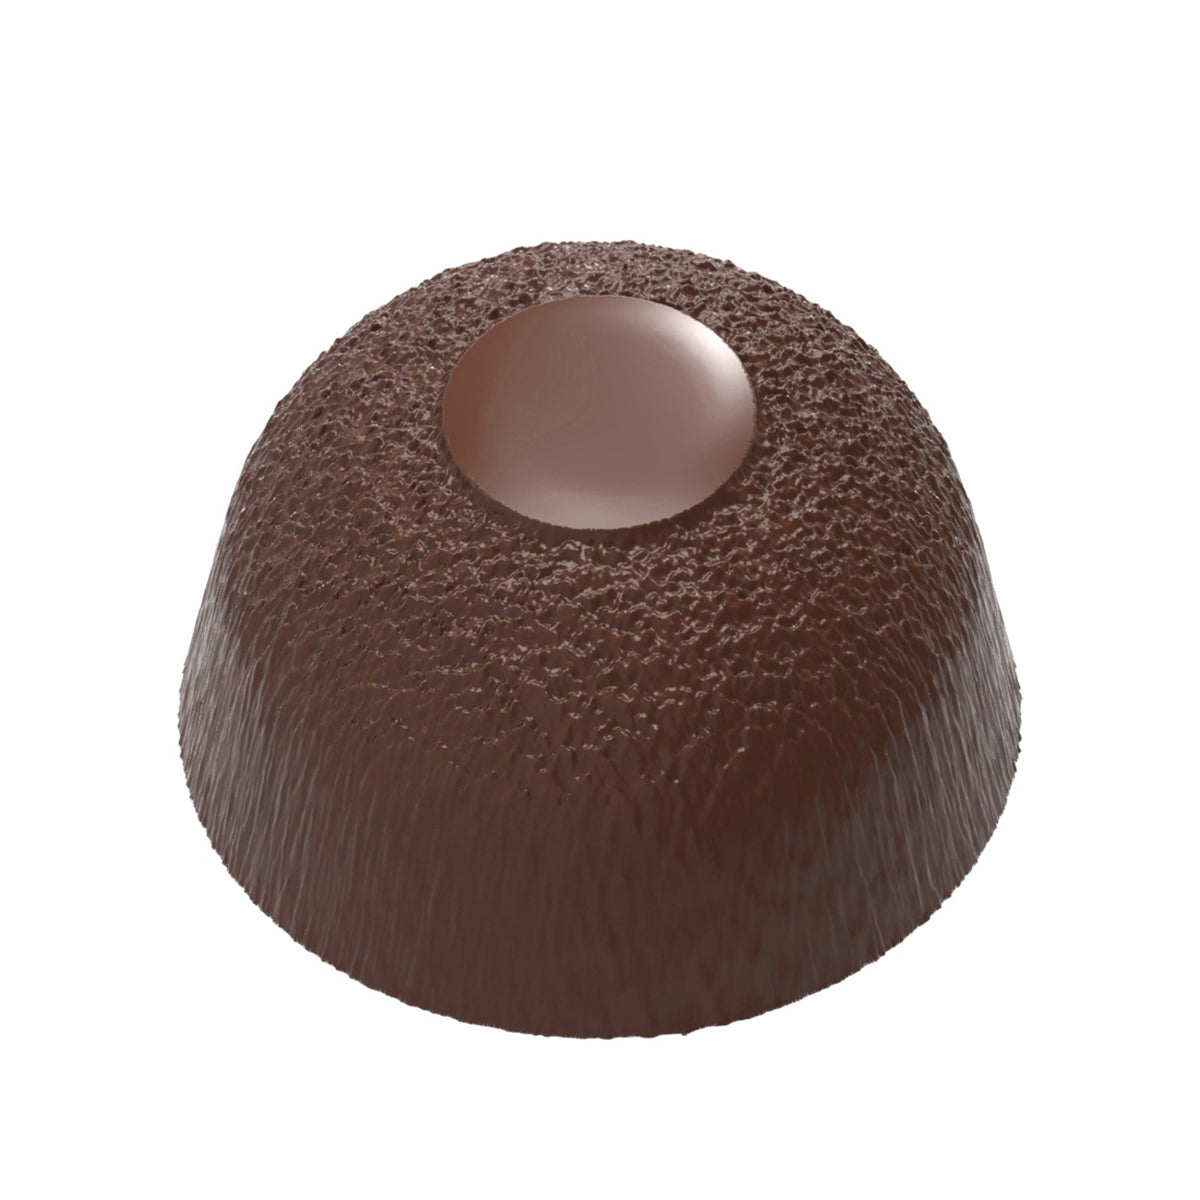 CHOCOLATE MOULD DOME WITH STRUCTURE CW12109 - Zucchero Canada